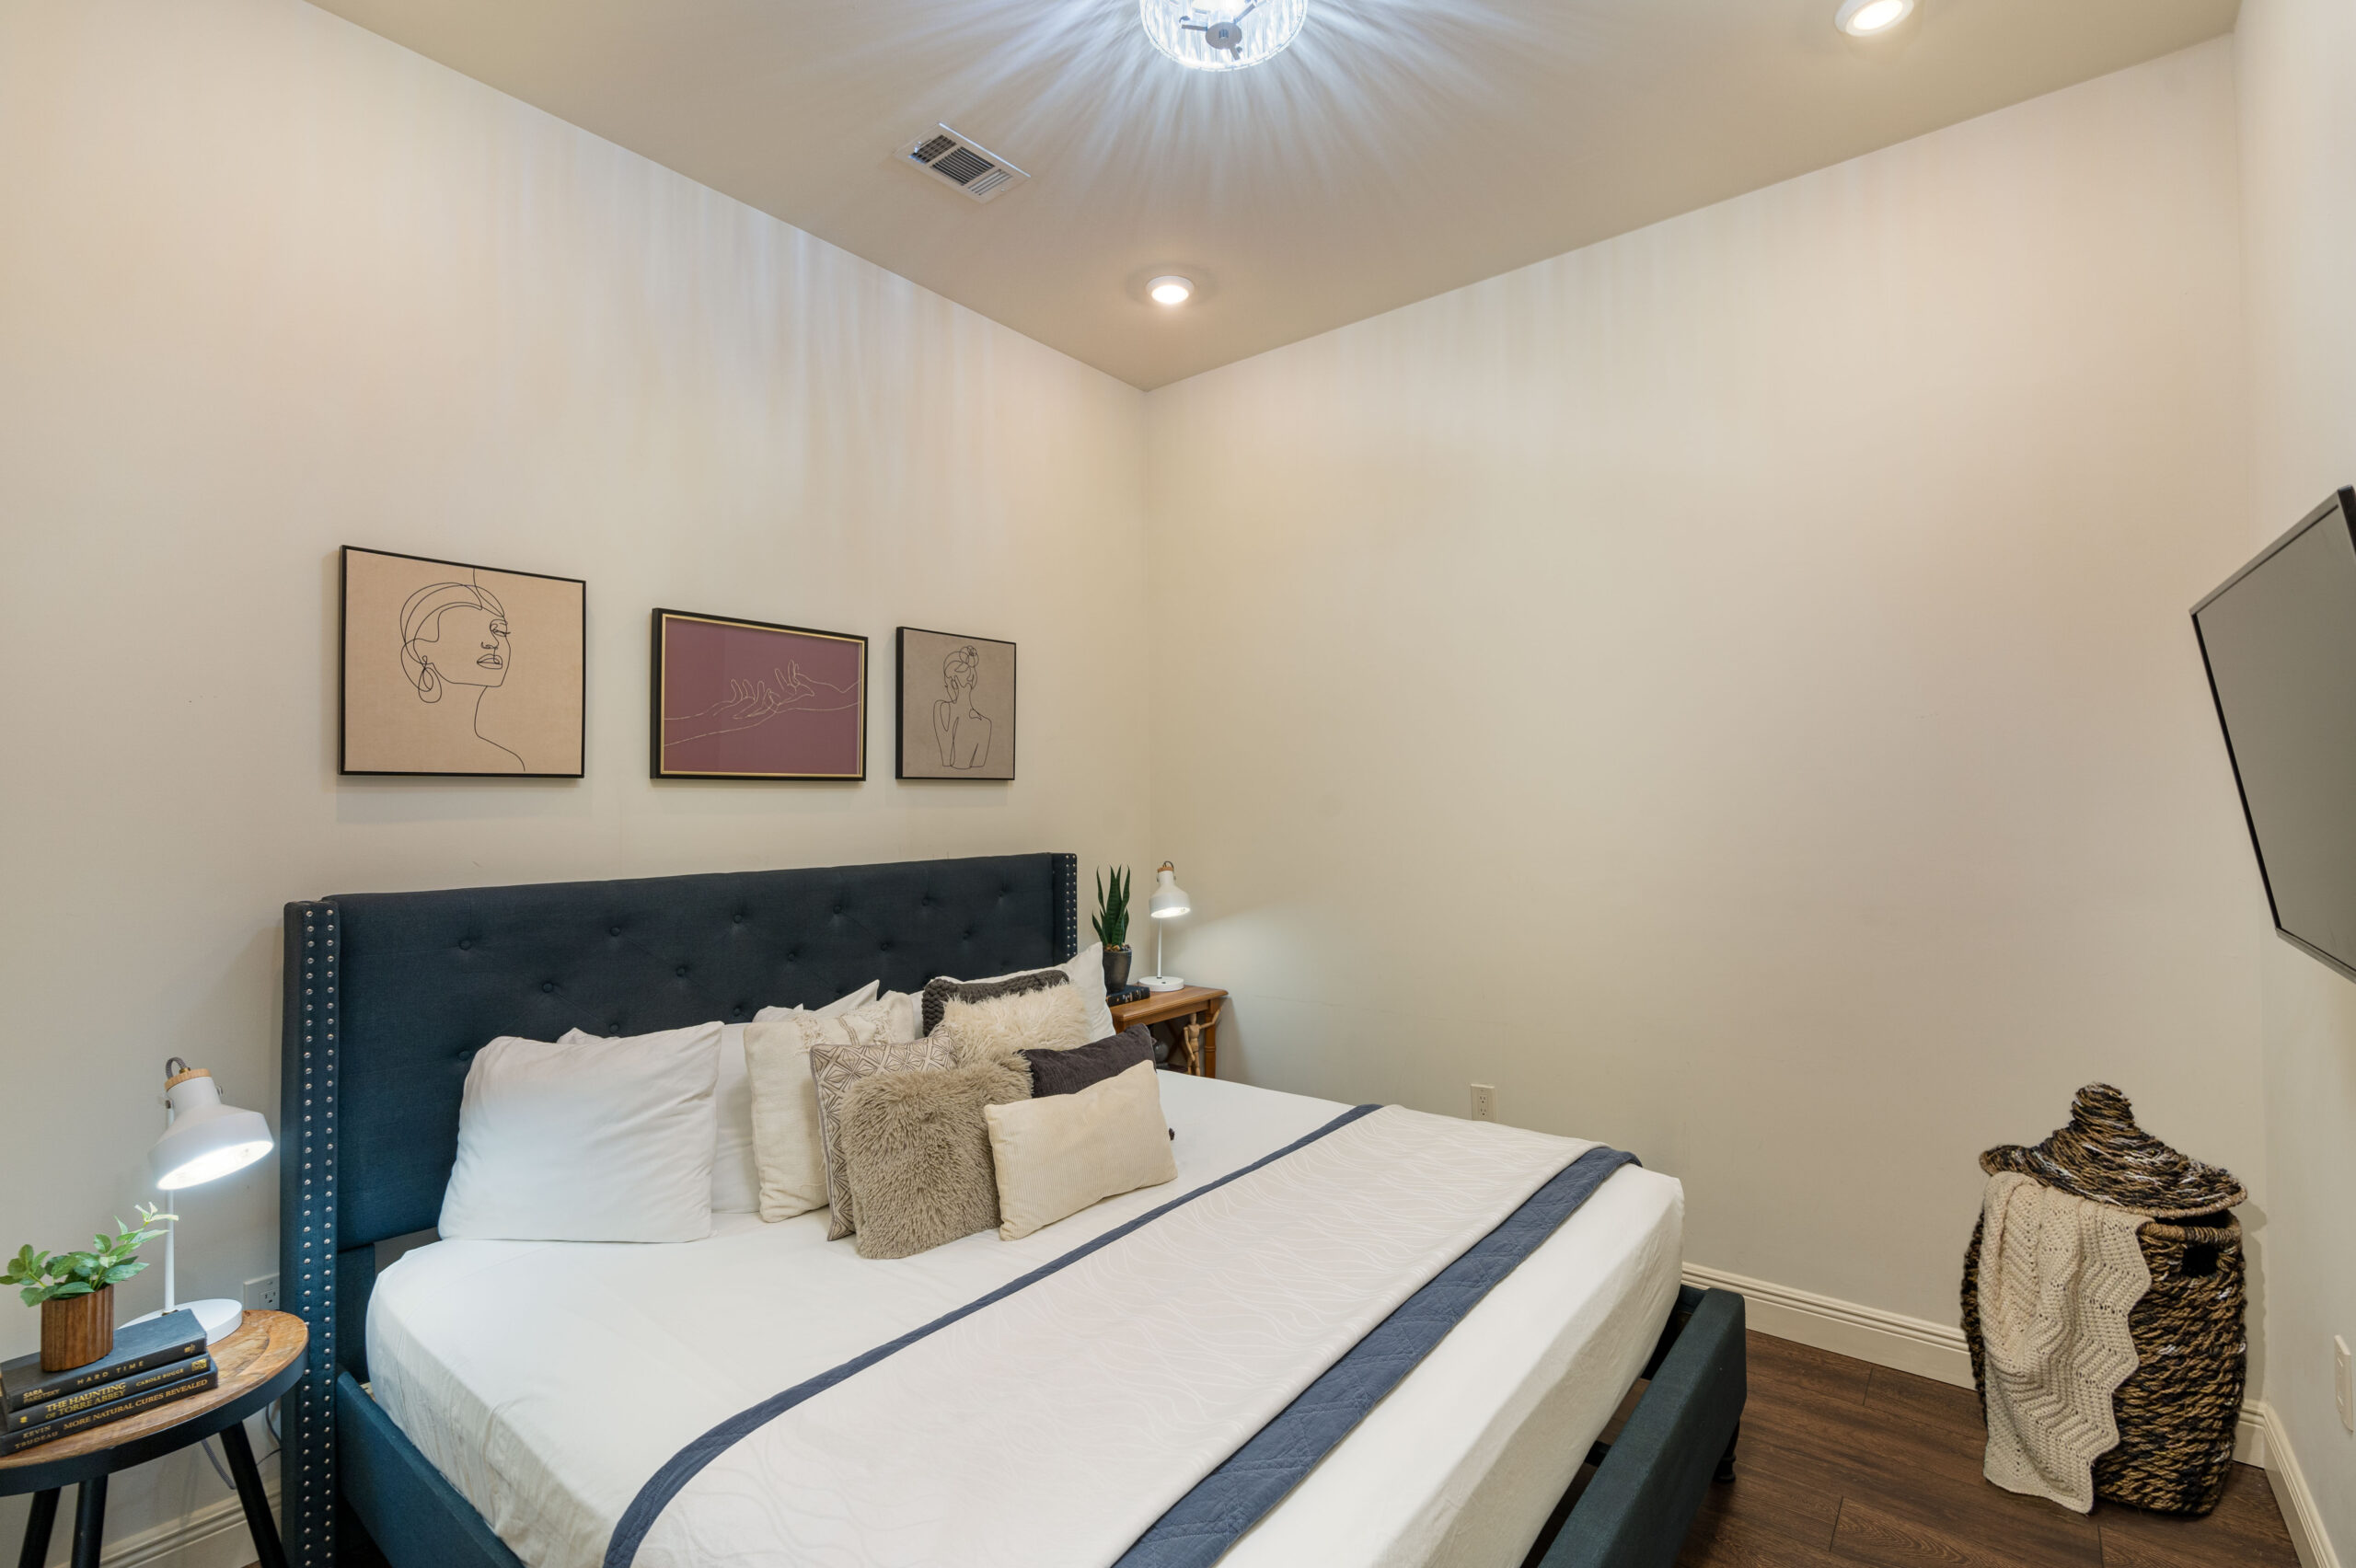 The Alexandre Unit 203 bedroom, a New Orleans luxury rental.